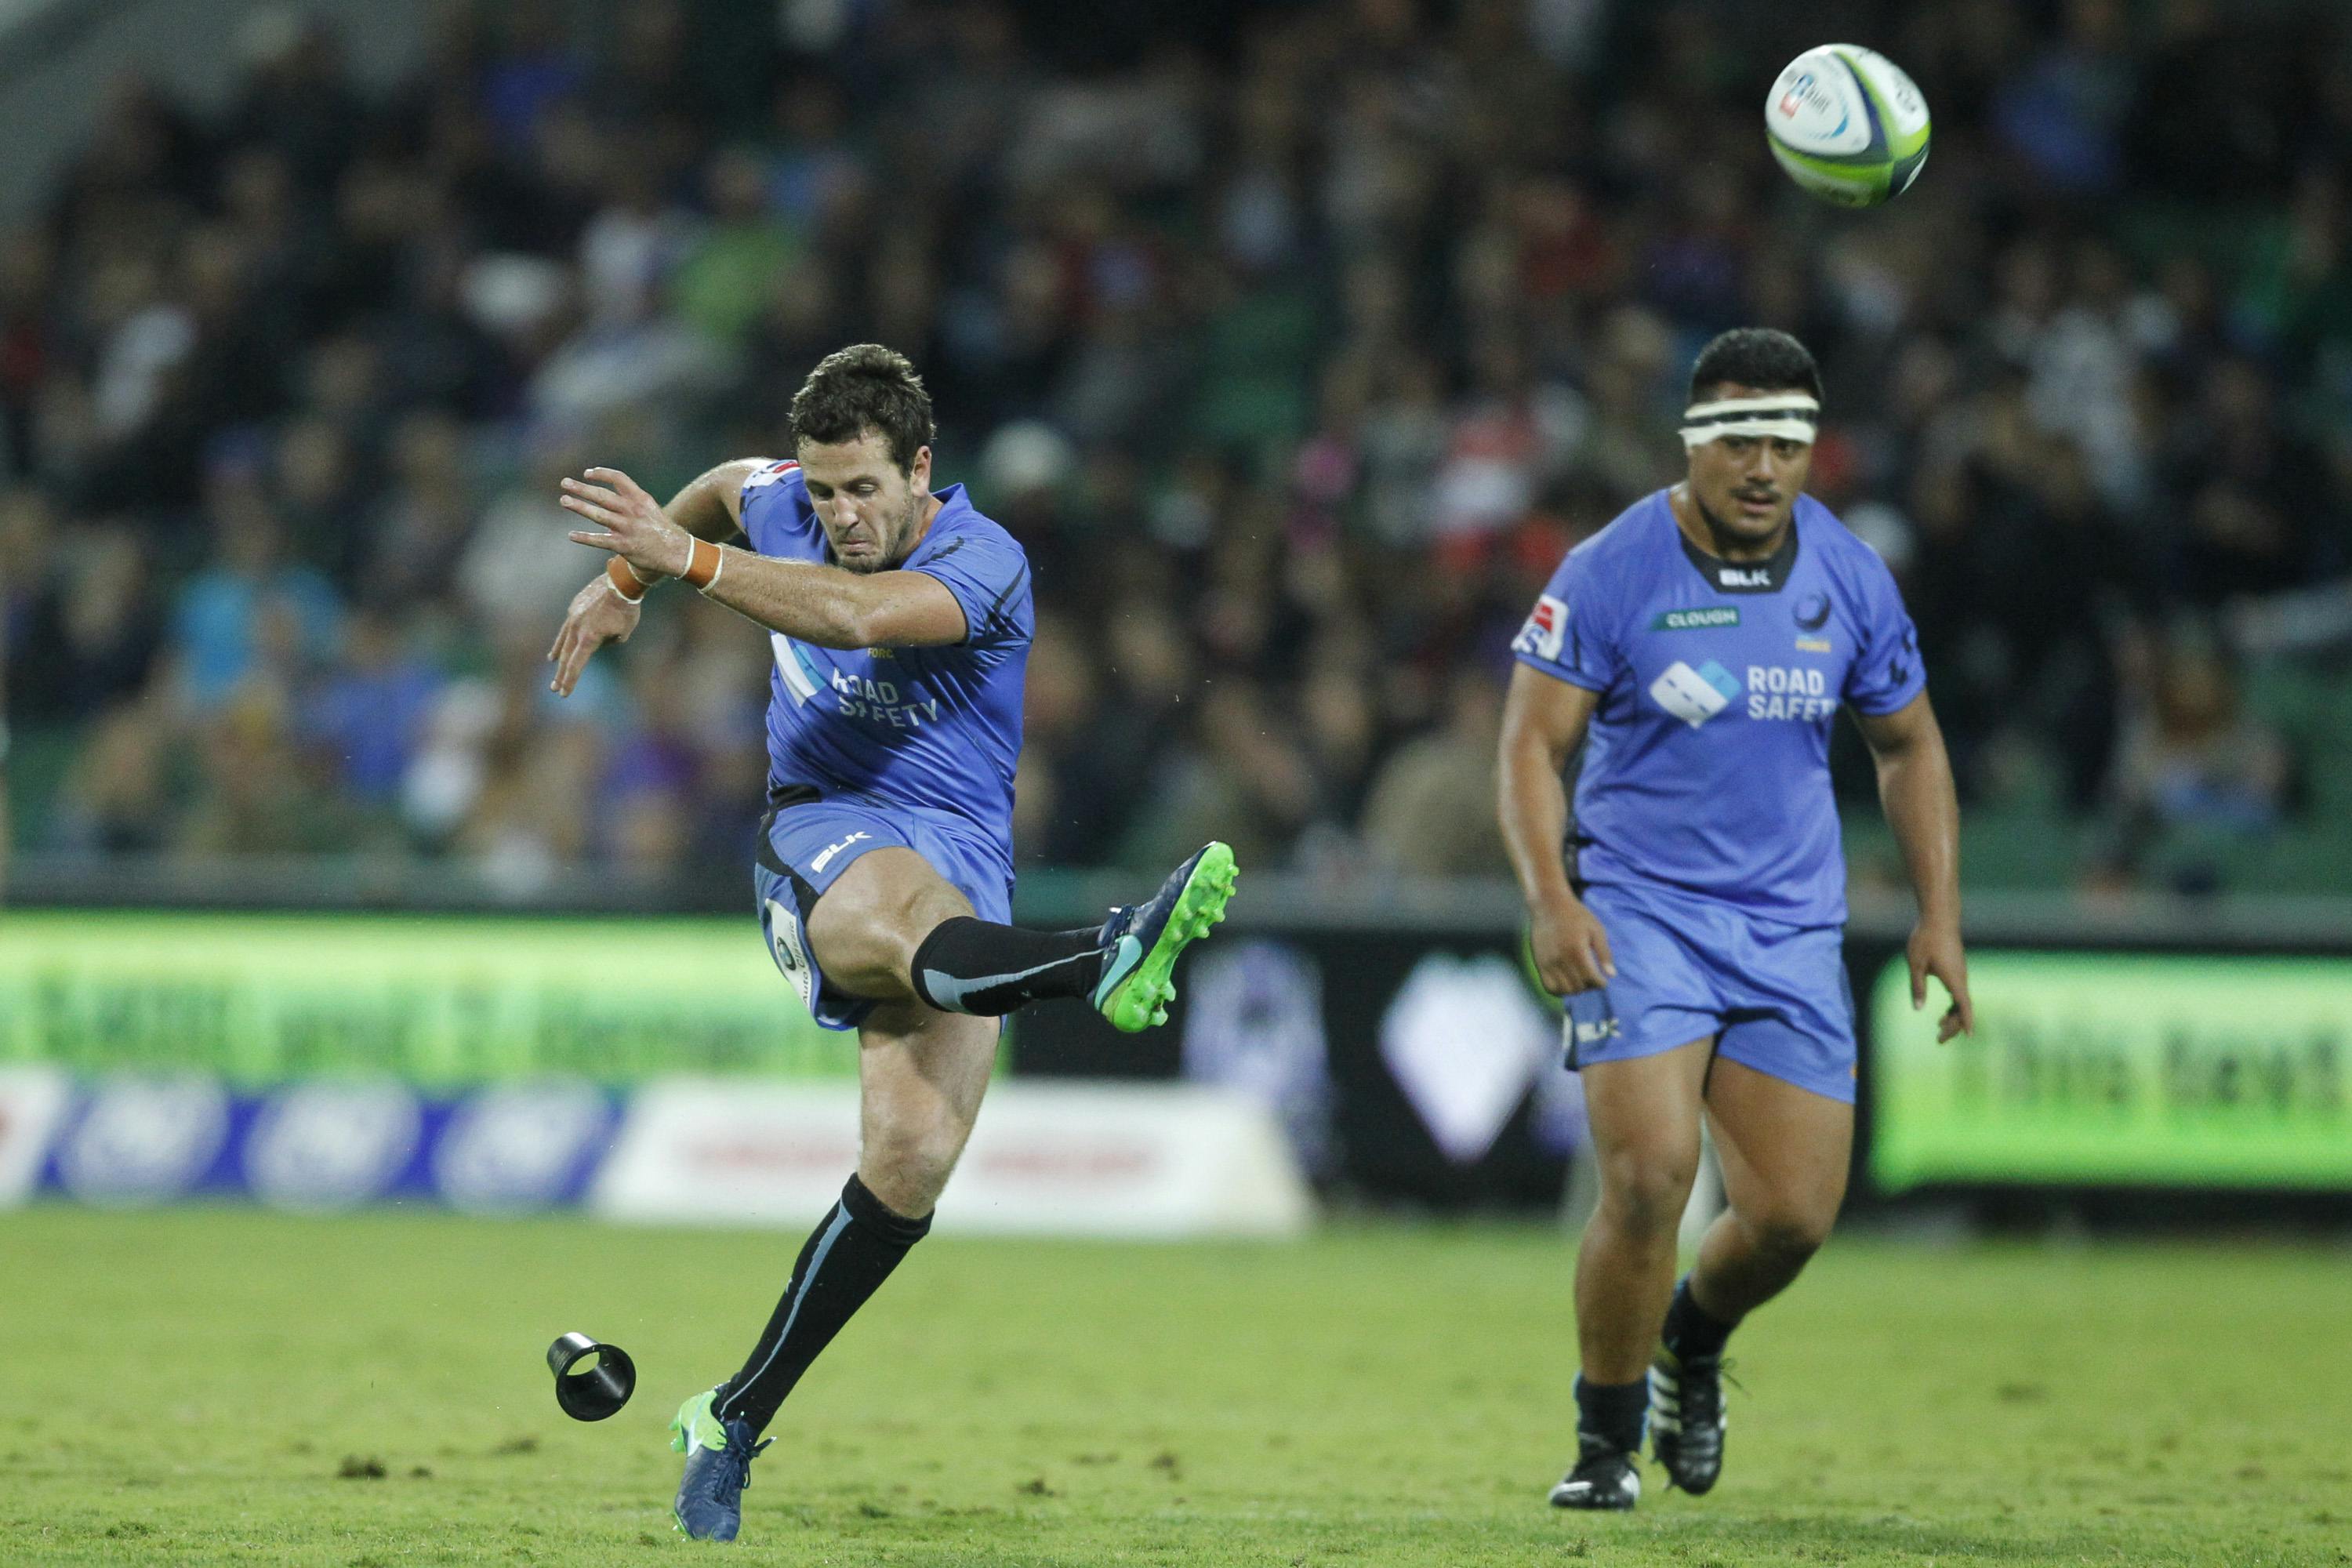 Ian Prior of the Force attempts a penalty kick during the round 10 Super Rugby match between the Force and the Lions at nib Stadium on April 29, 2017 in Perth, Australia.